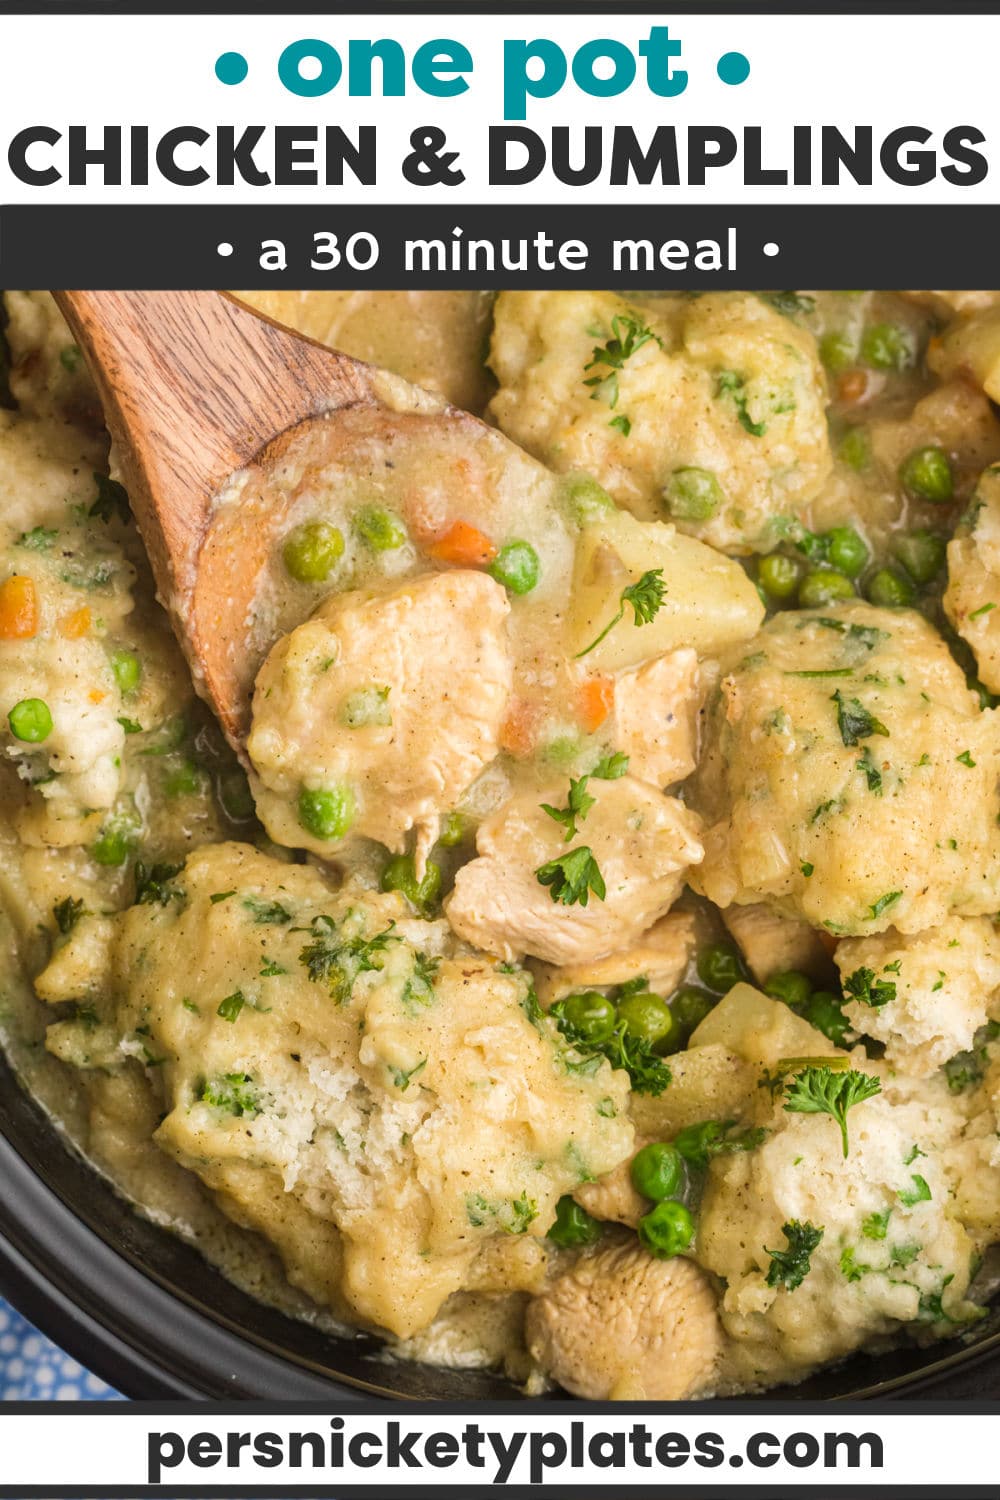 Easy Chicken & Dumplings is my favorite comforting meal. This vintage recipe is filled with flavorful chicken, veggies, and dumplings that you would never guess only takes 30 minutes and one pot to prepare! | www.persnicketyplates.com